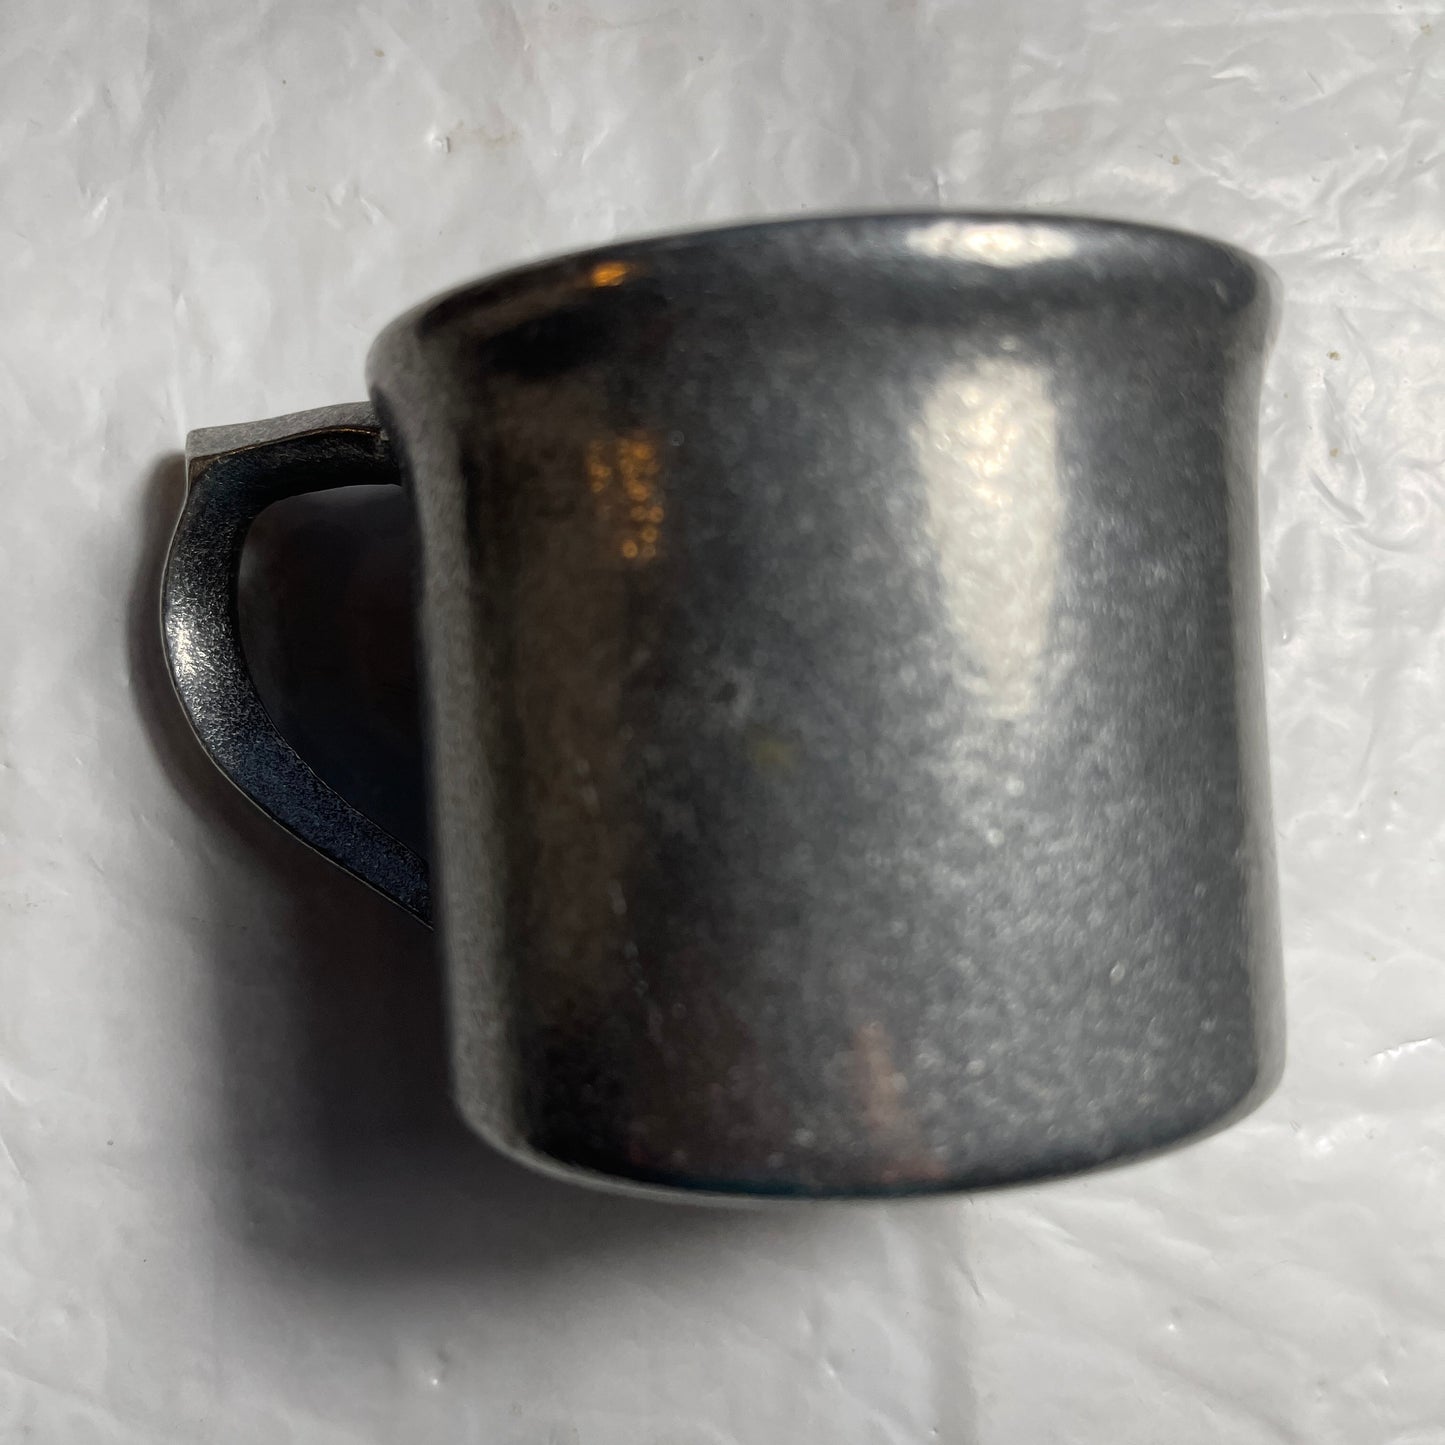 Pewter Child Size Mug Vintage Collectible Serving Ware 2.5 By 3 inches